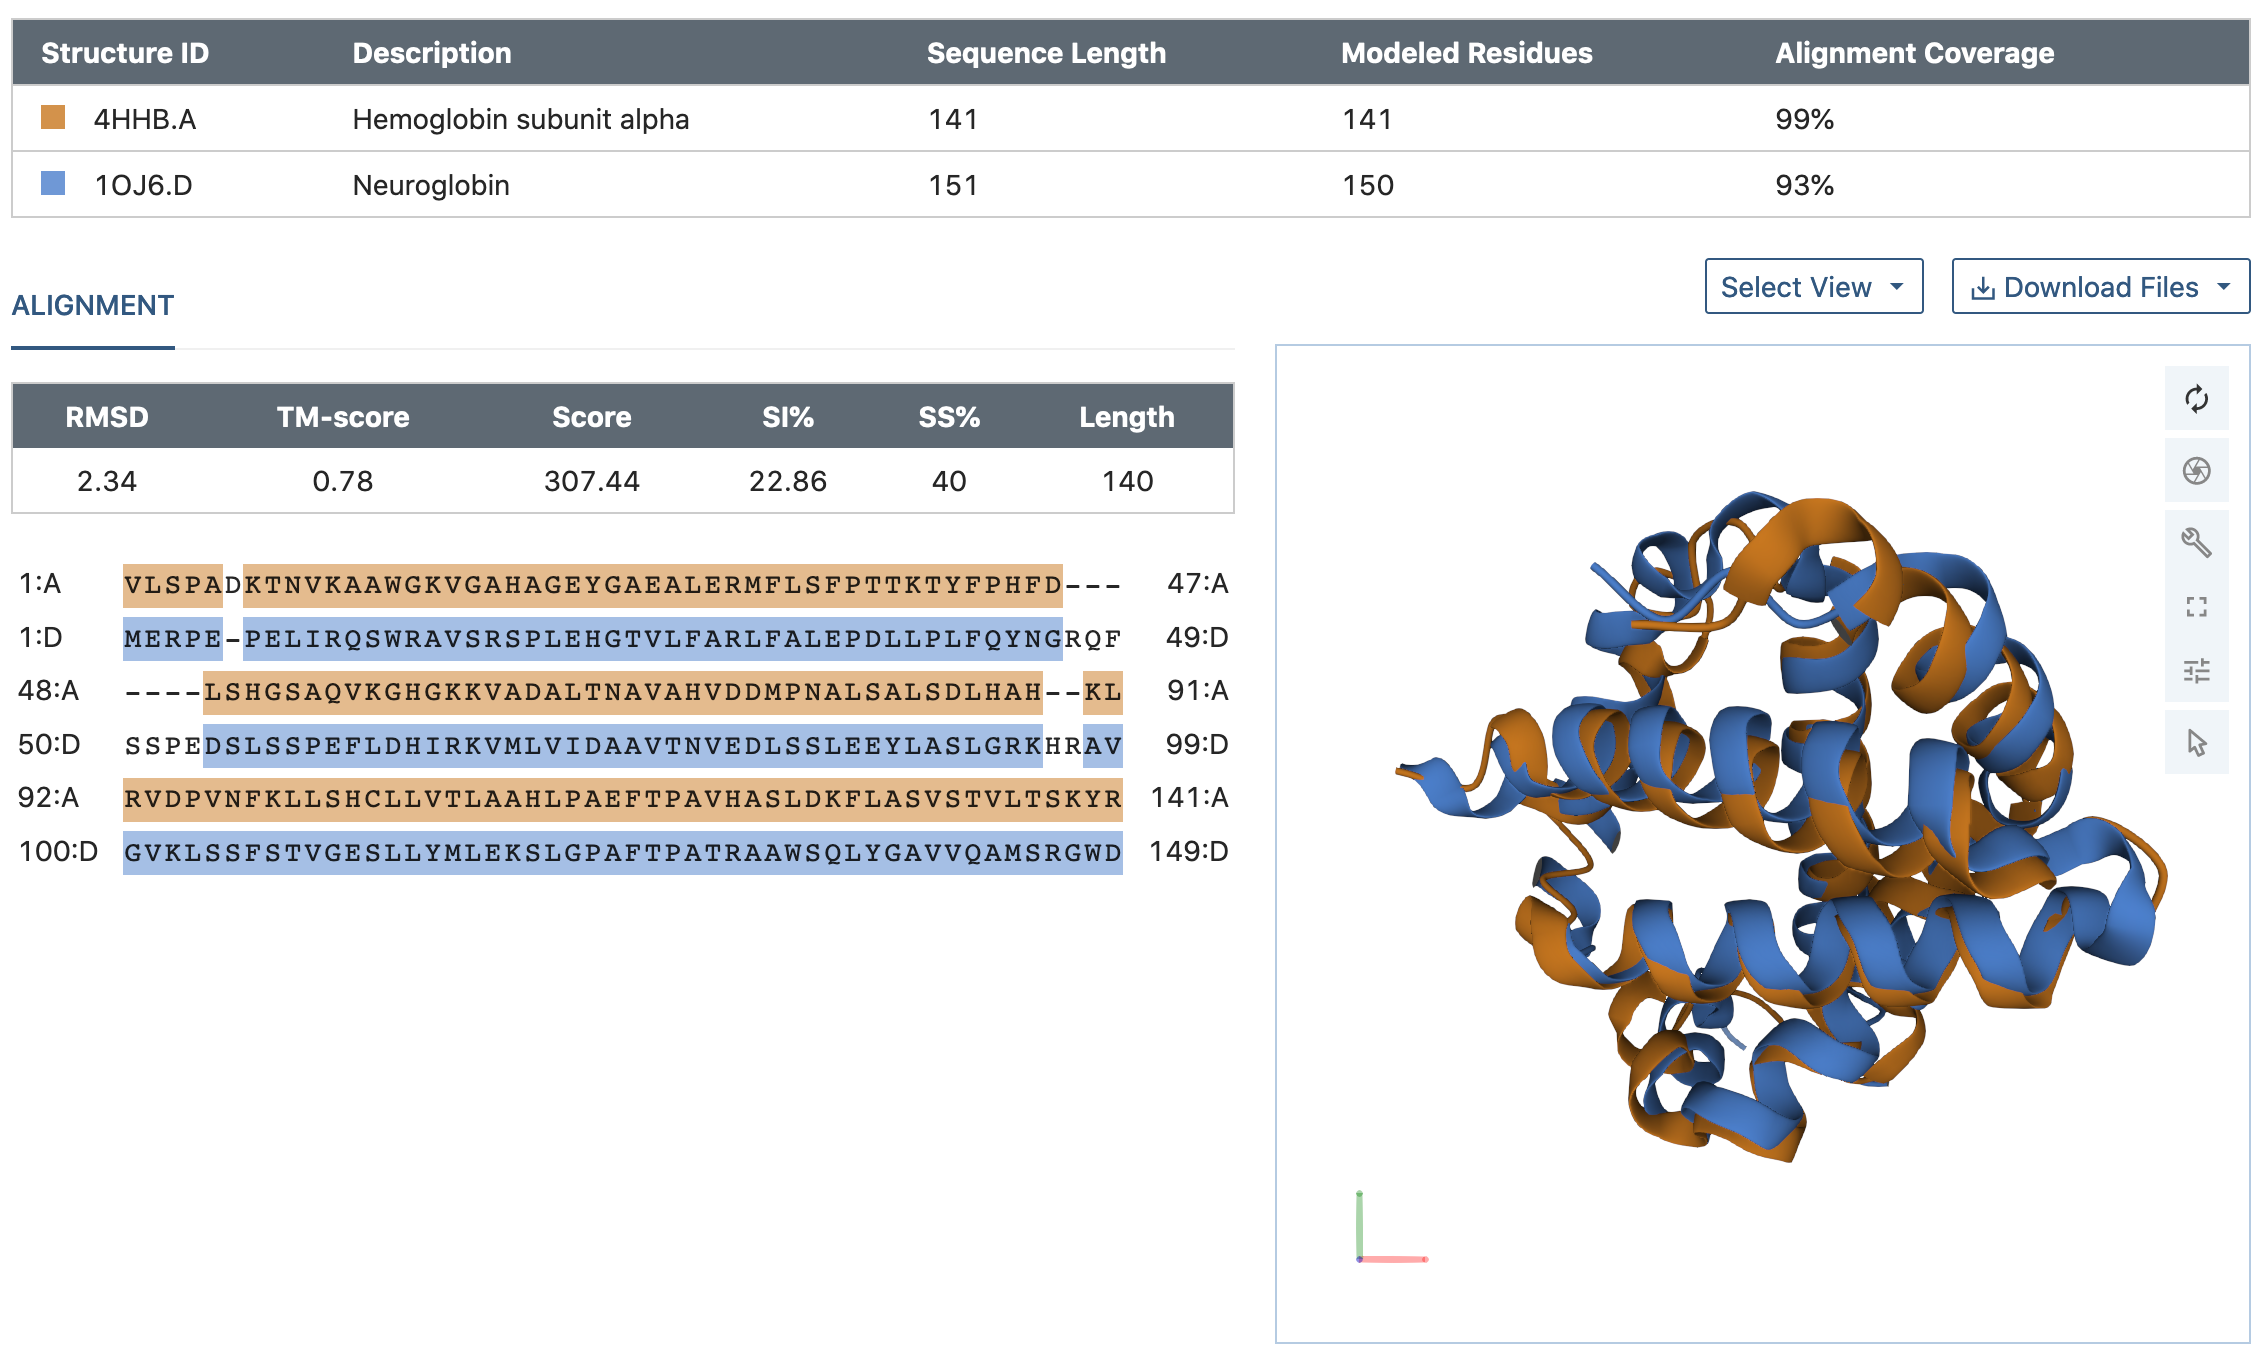 <a href="https://www.rcsb.org/alignment">Use the Pairwise Structure Alignment tool to view sequence alignments and superposed 3D structures.</a>